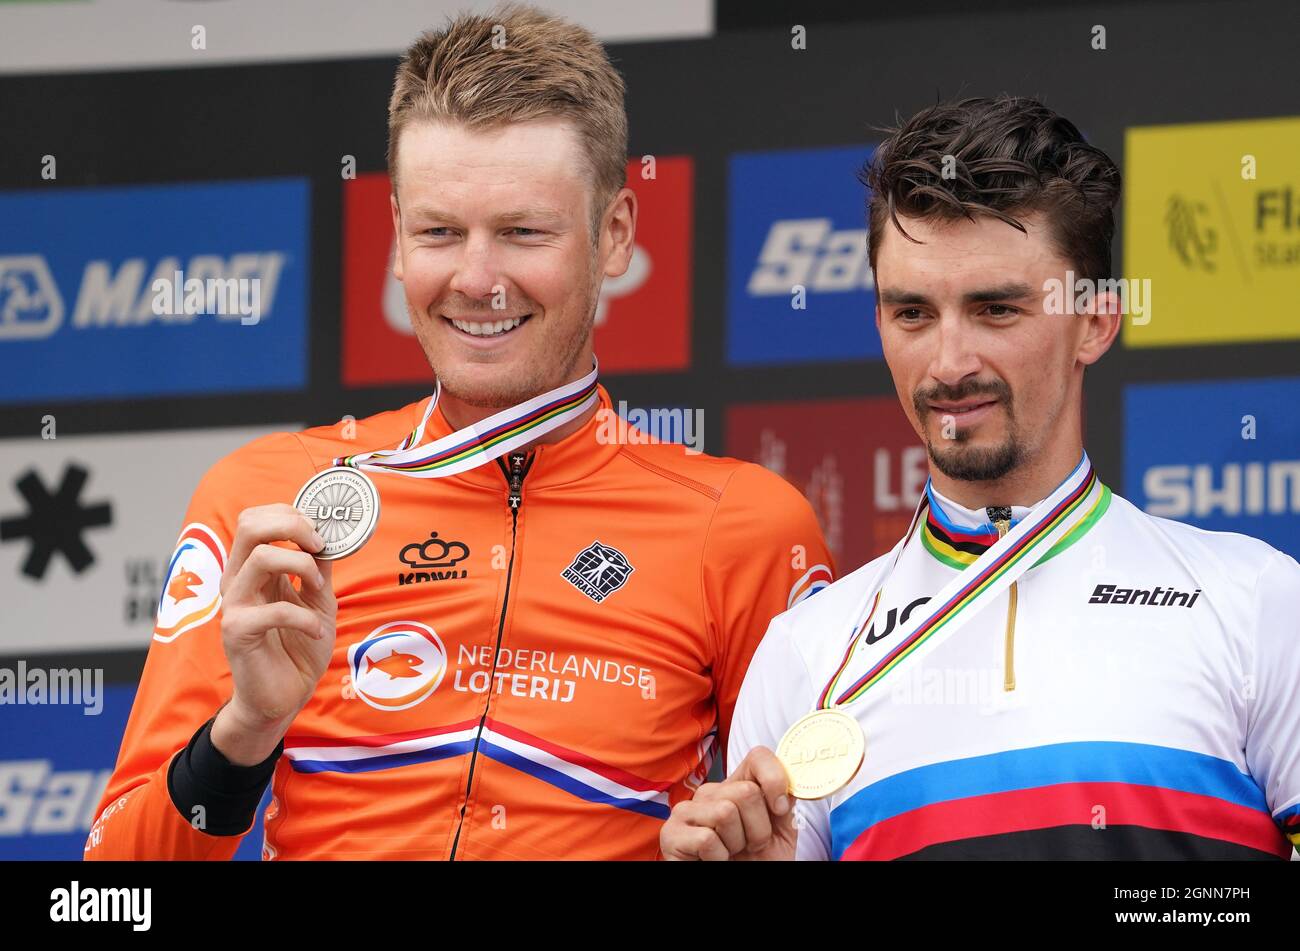 Dylan Van Baarle (NED) and Julian Alaphilippe (FRA) (FRA) (FRA) pictured on the podium of the road race of the UCI World Championships Road Cycling Flanders 2021 on Sunday 26 September 2021 at Leuven in Belgium. Photo by SCS/Soenar Chamid/AFLO (HOLLAND OUT) Stock Photo